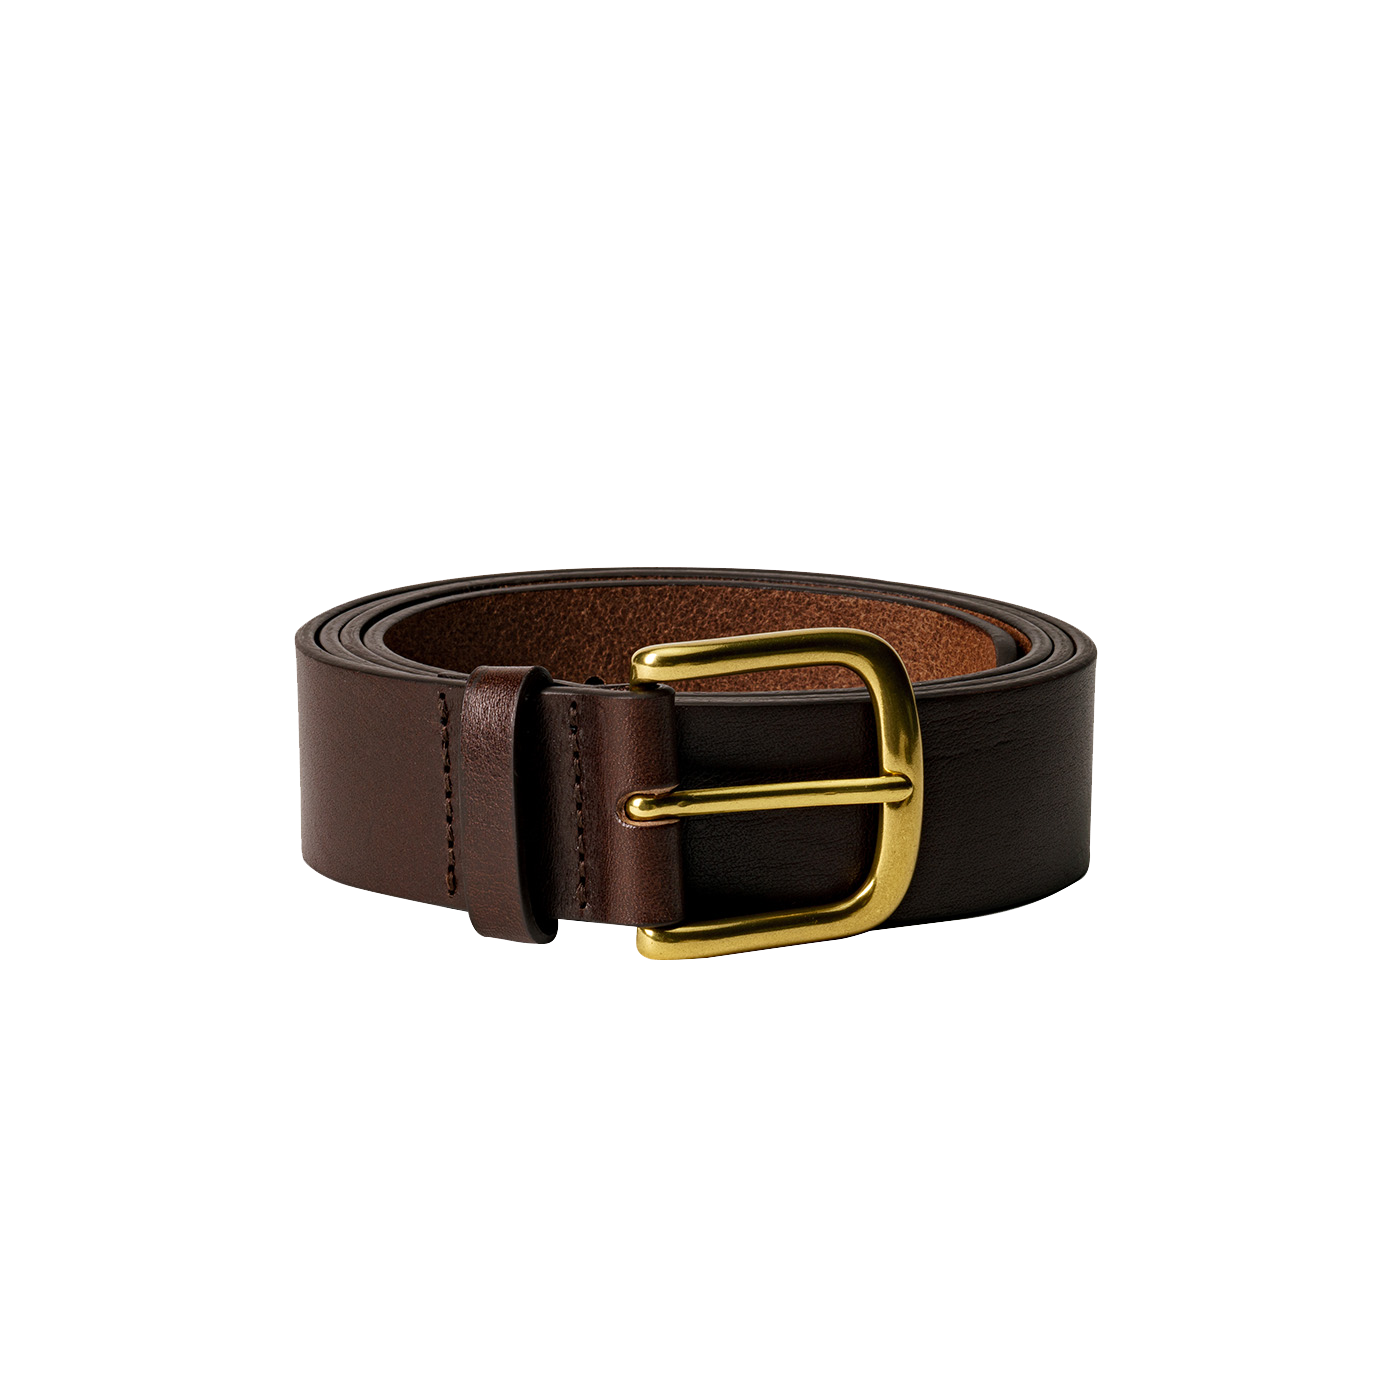 VEGETABLE TANNED BELT Clothing Accessories ISTO. Brown 85 cm 